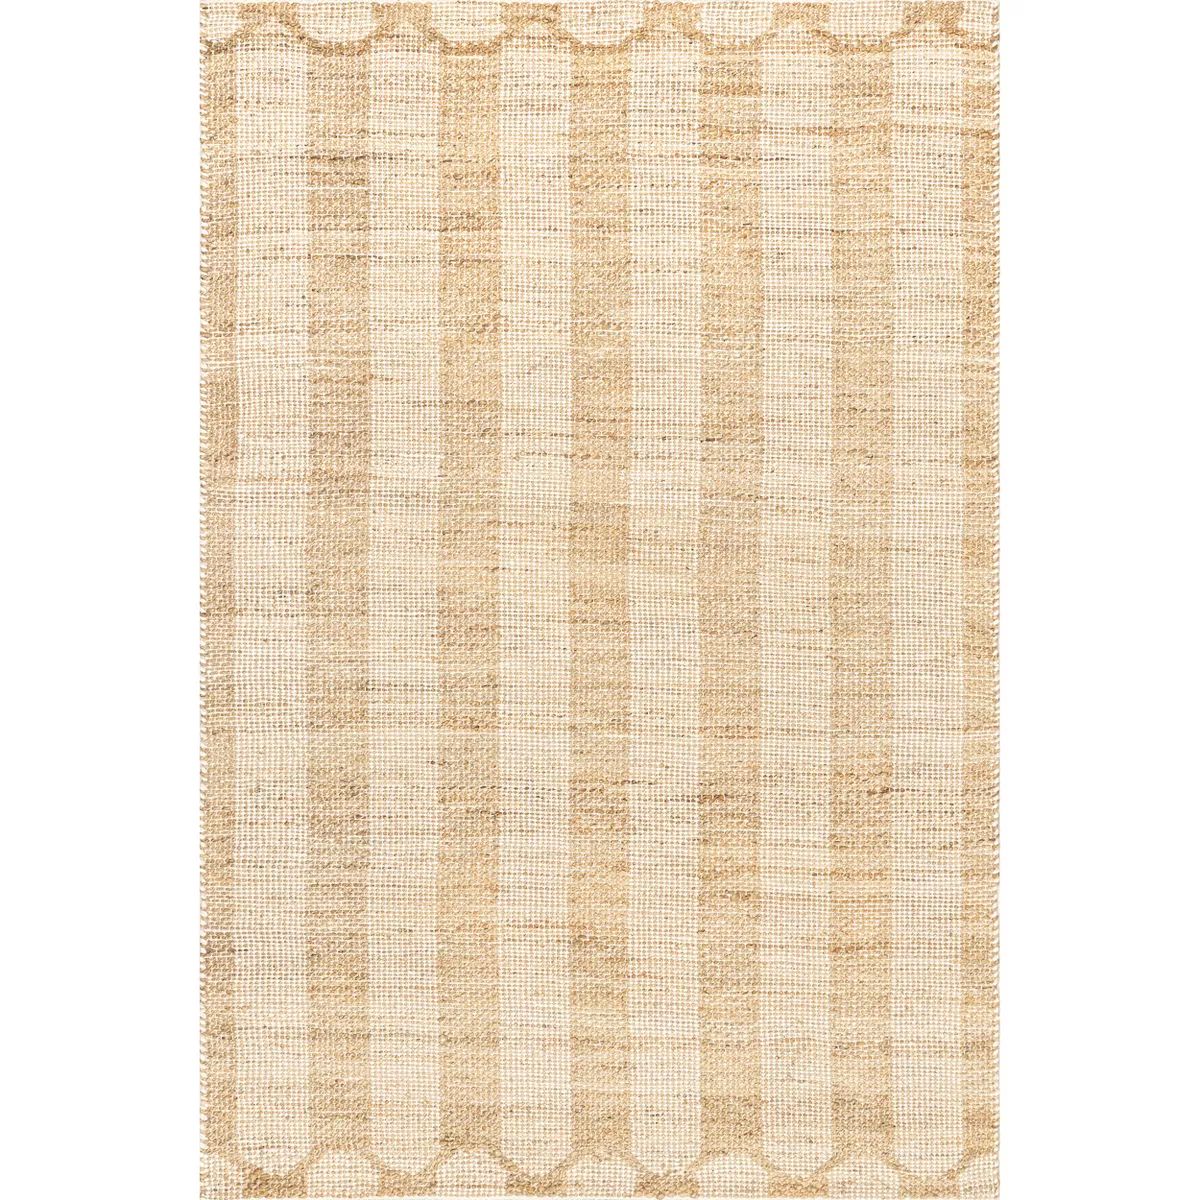 Emily Henderson x RugsUSA - Hillcrest Jute and Wool Area Rug | Target